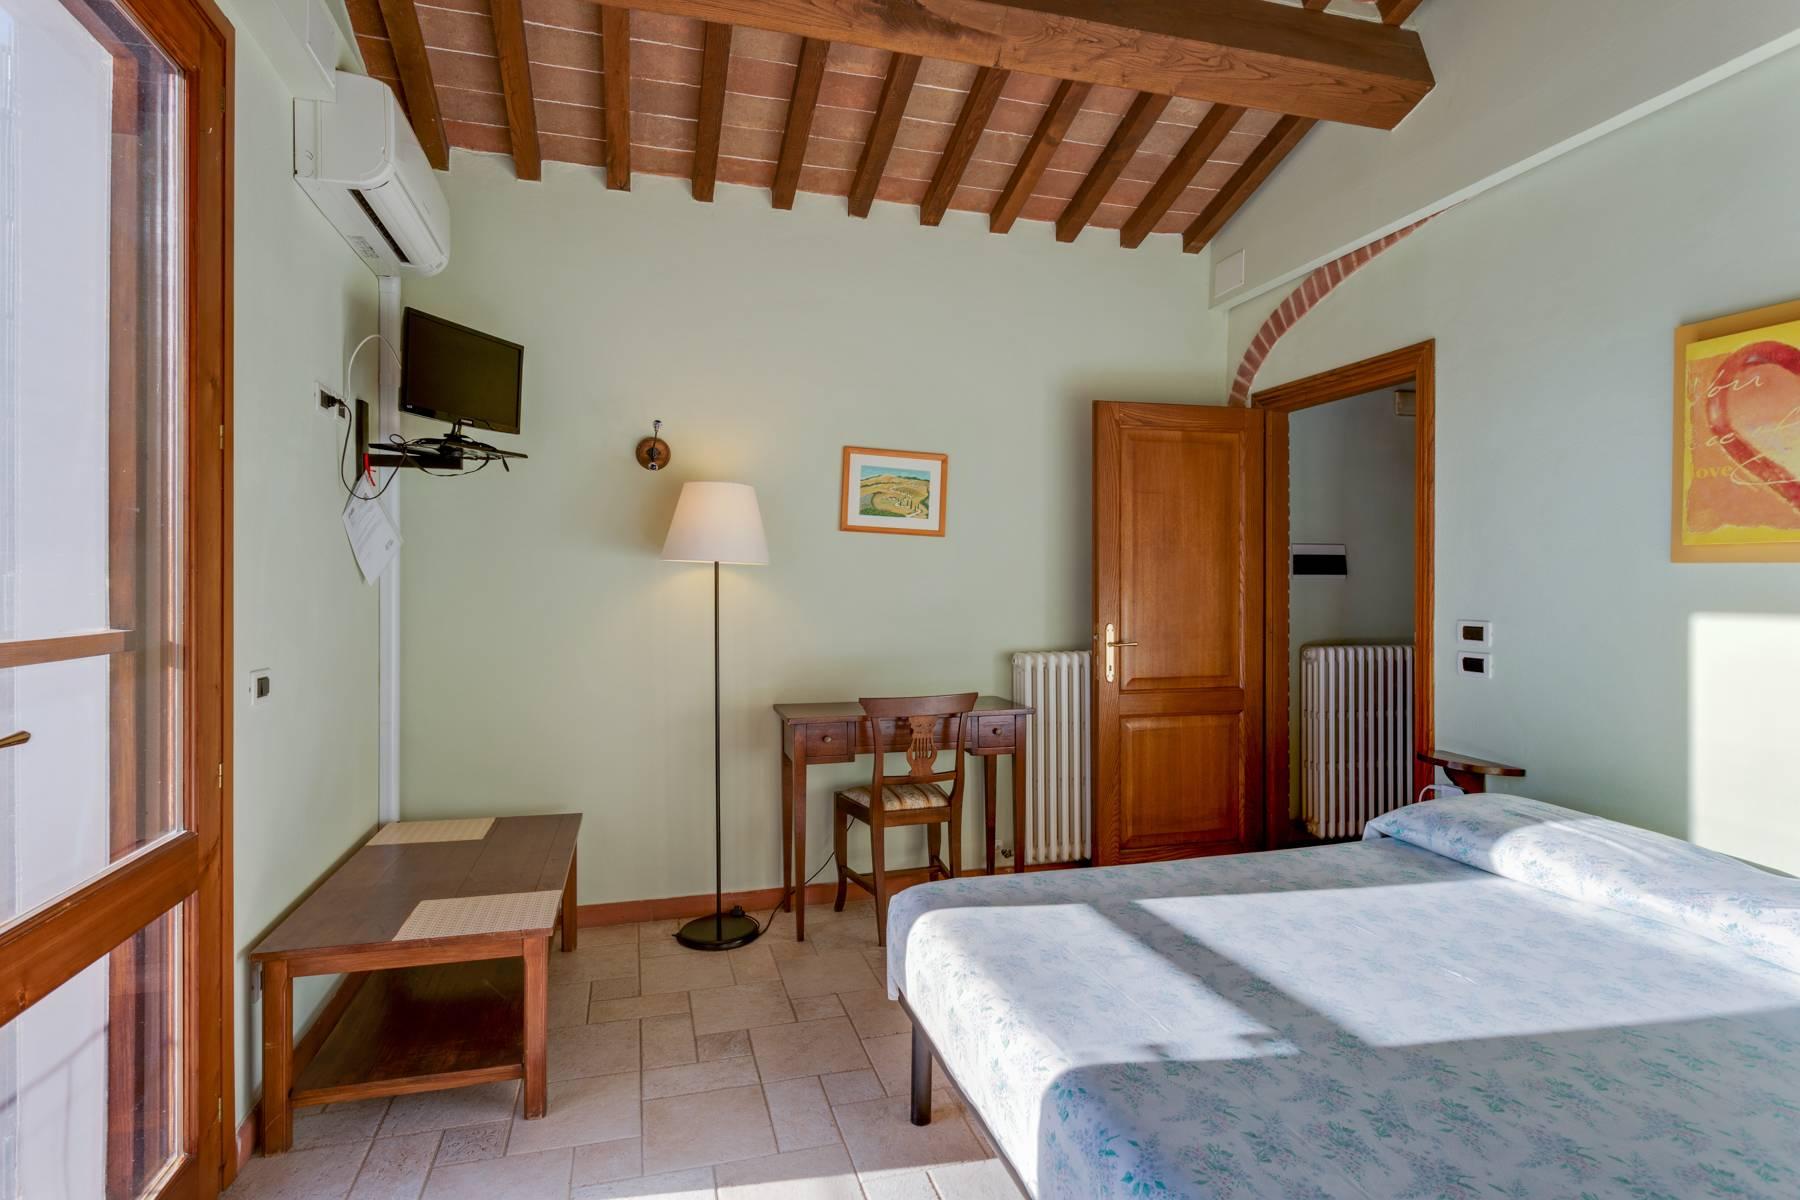 Beautiful country house with agriturismo and vineyard walking distance from Montepulciano - 25